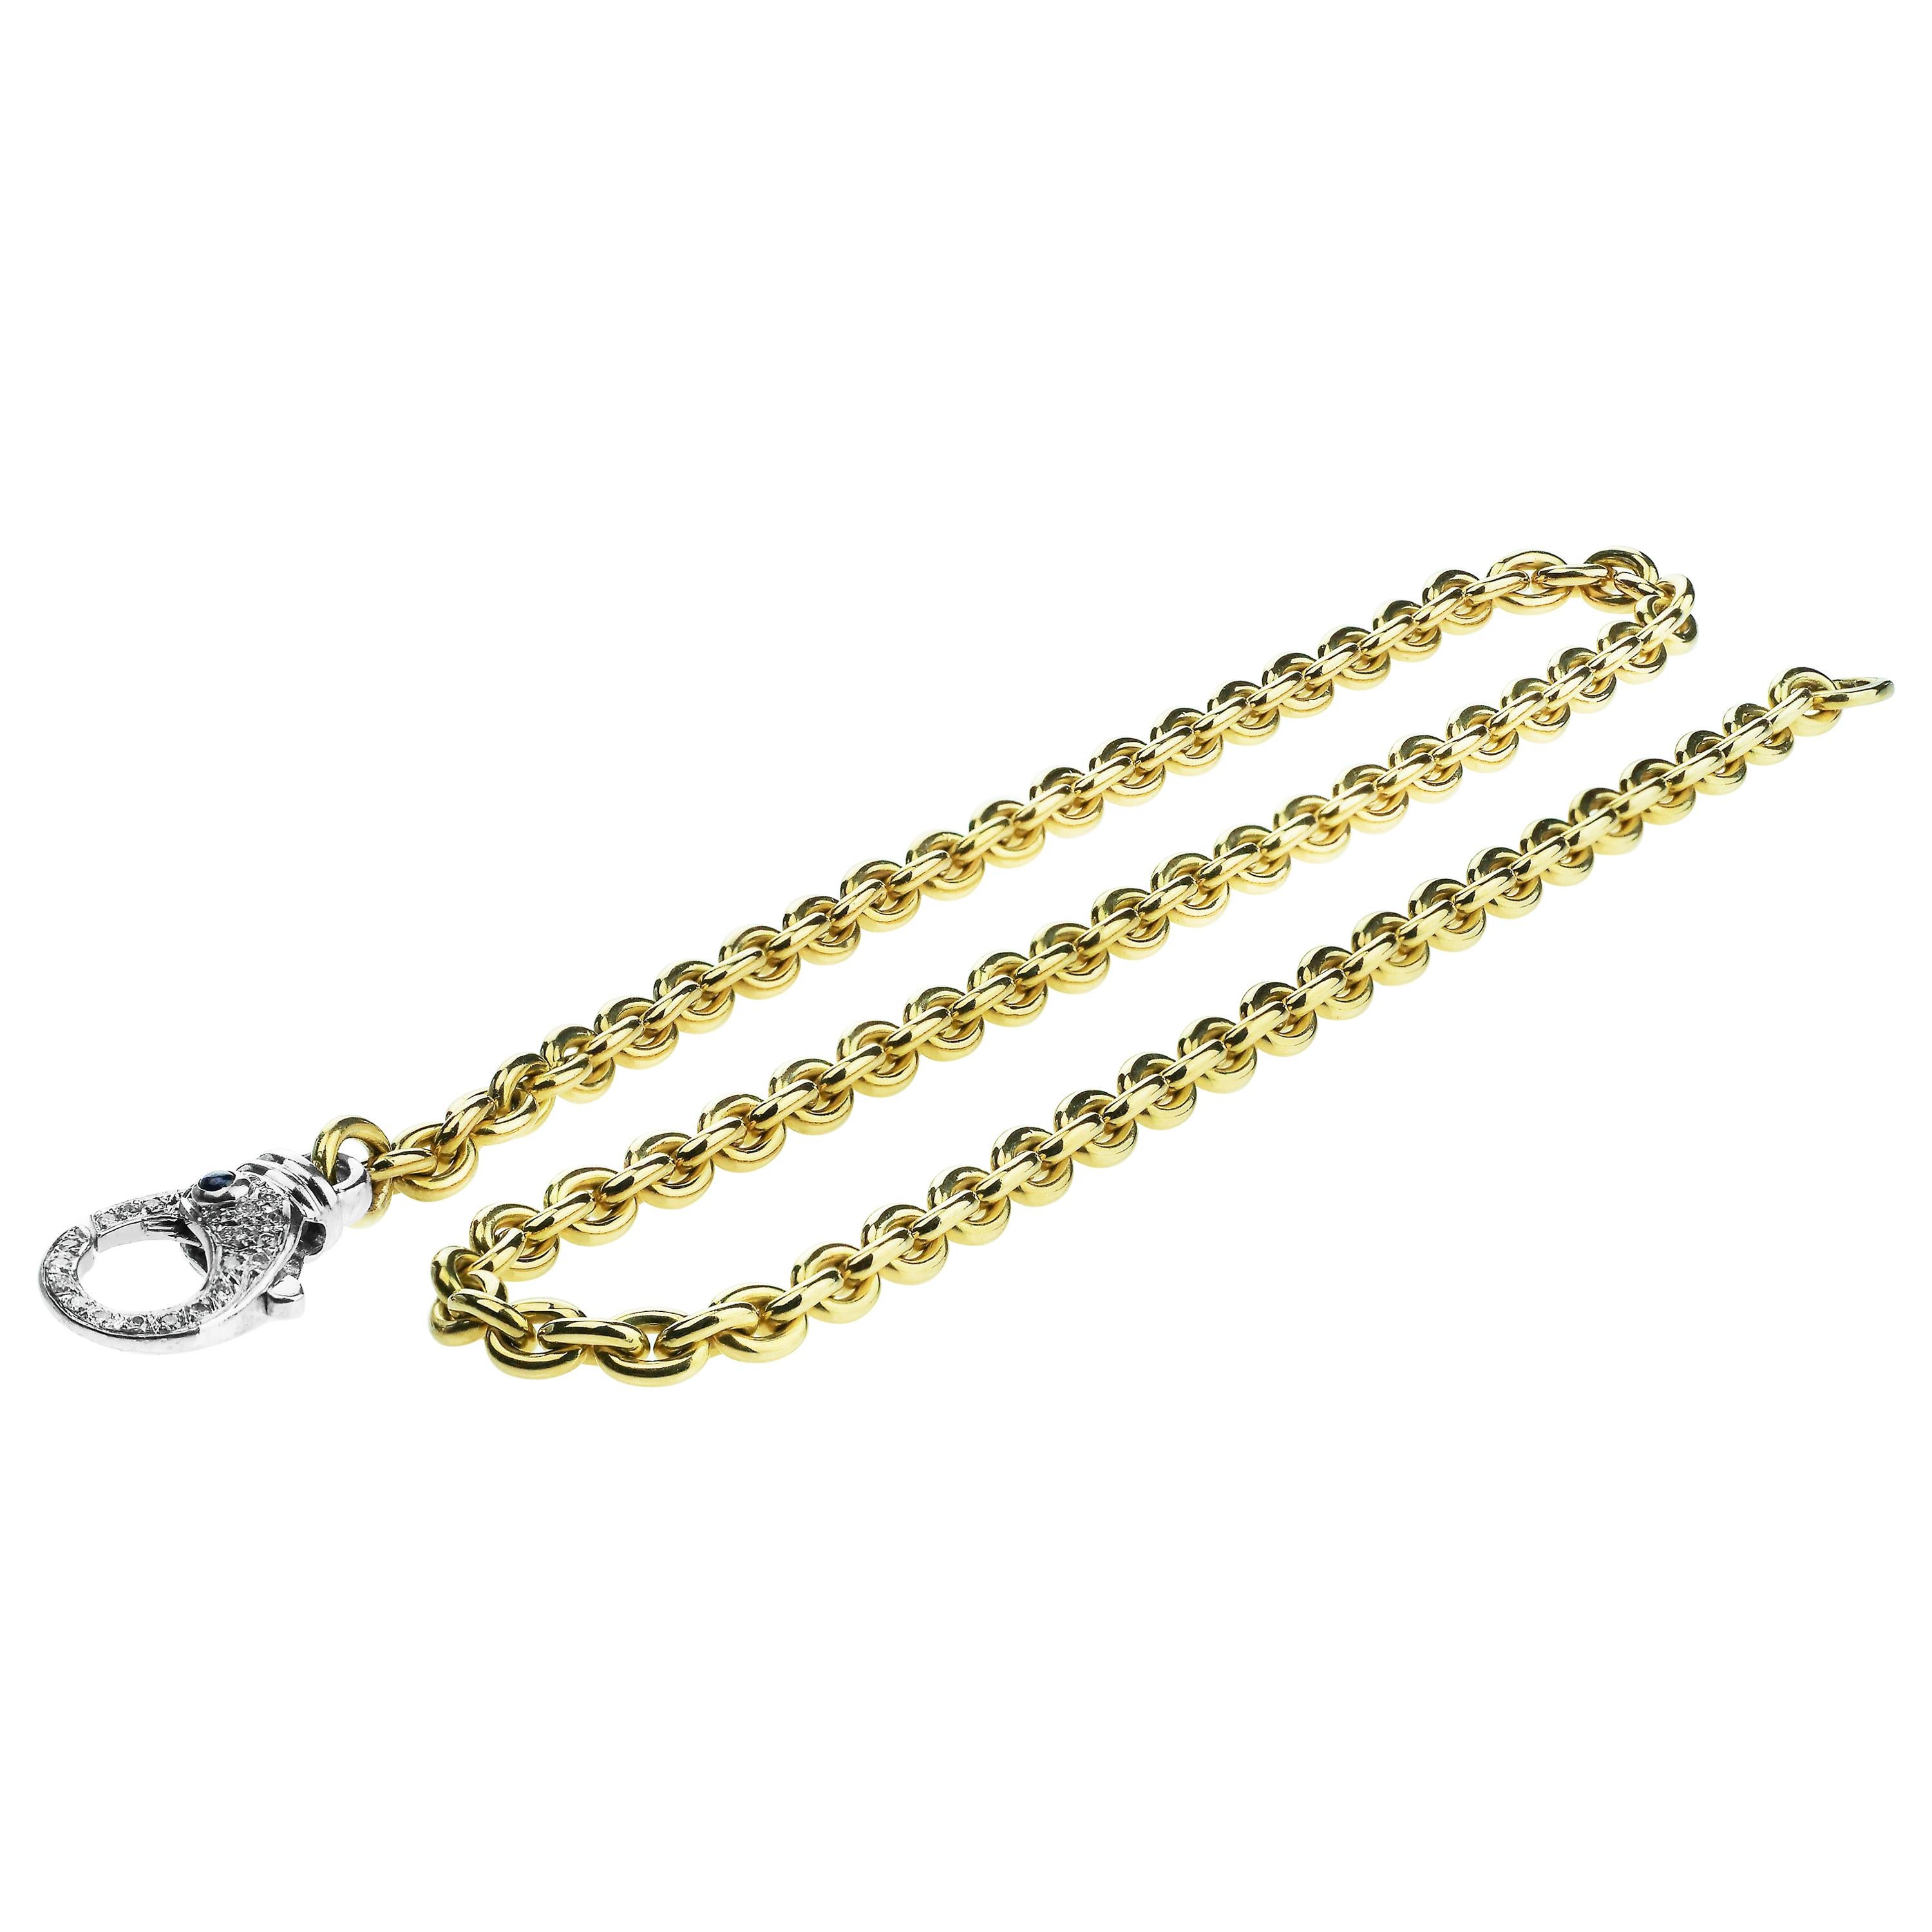 18K Yellow Gold Chain, Solid, Heavy with Diamond & Emerald Clasp